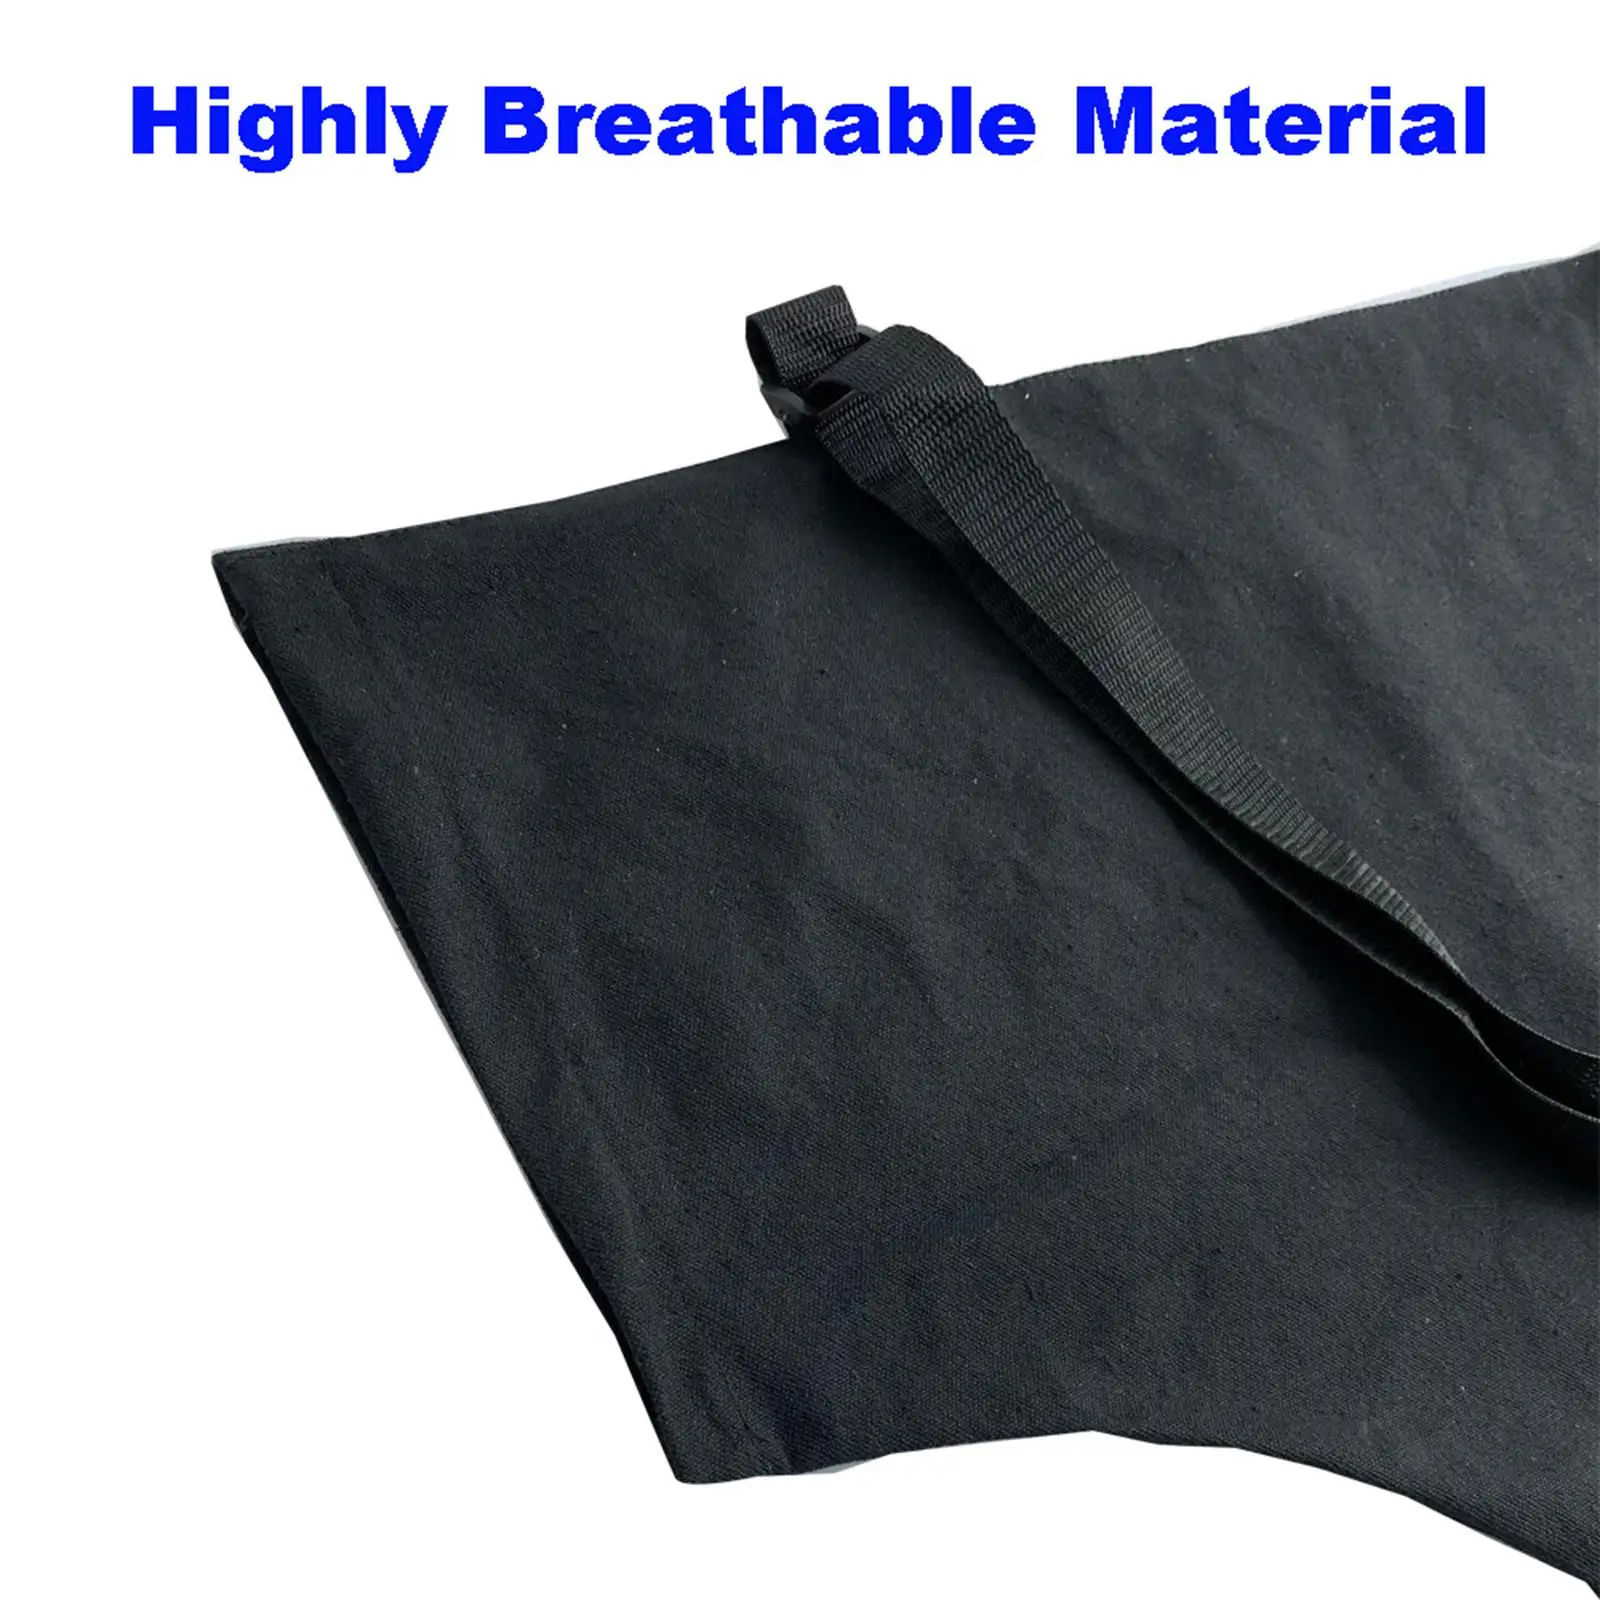 Outdoor Blower Vacuum Bag Dust Bags Dust Collection Replacement Bags Shredder Vacuum Bag Storage Bag for Garden Backyard Lawn